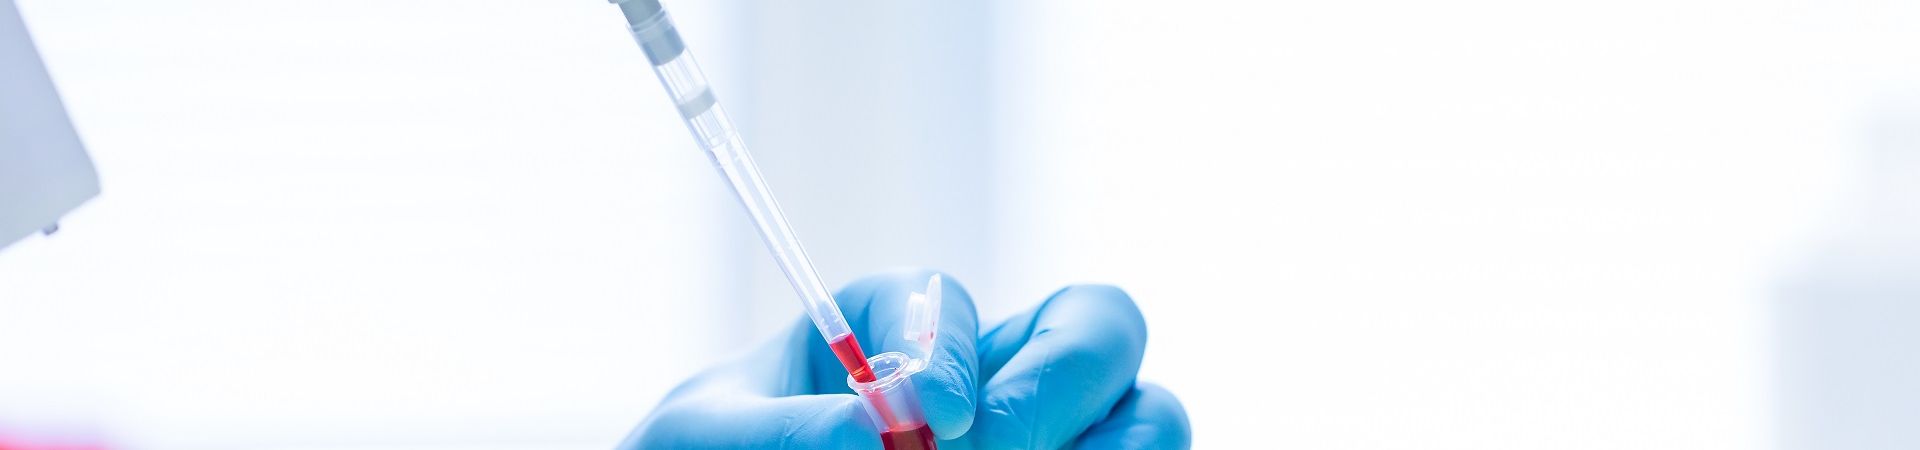 Researcher's hands in blue gloves pipette red liquid